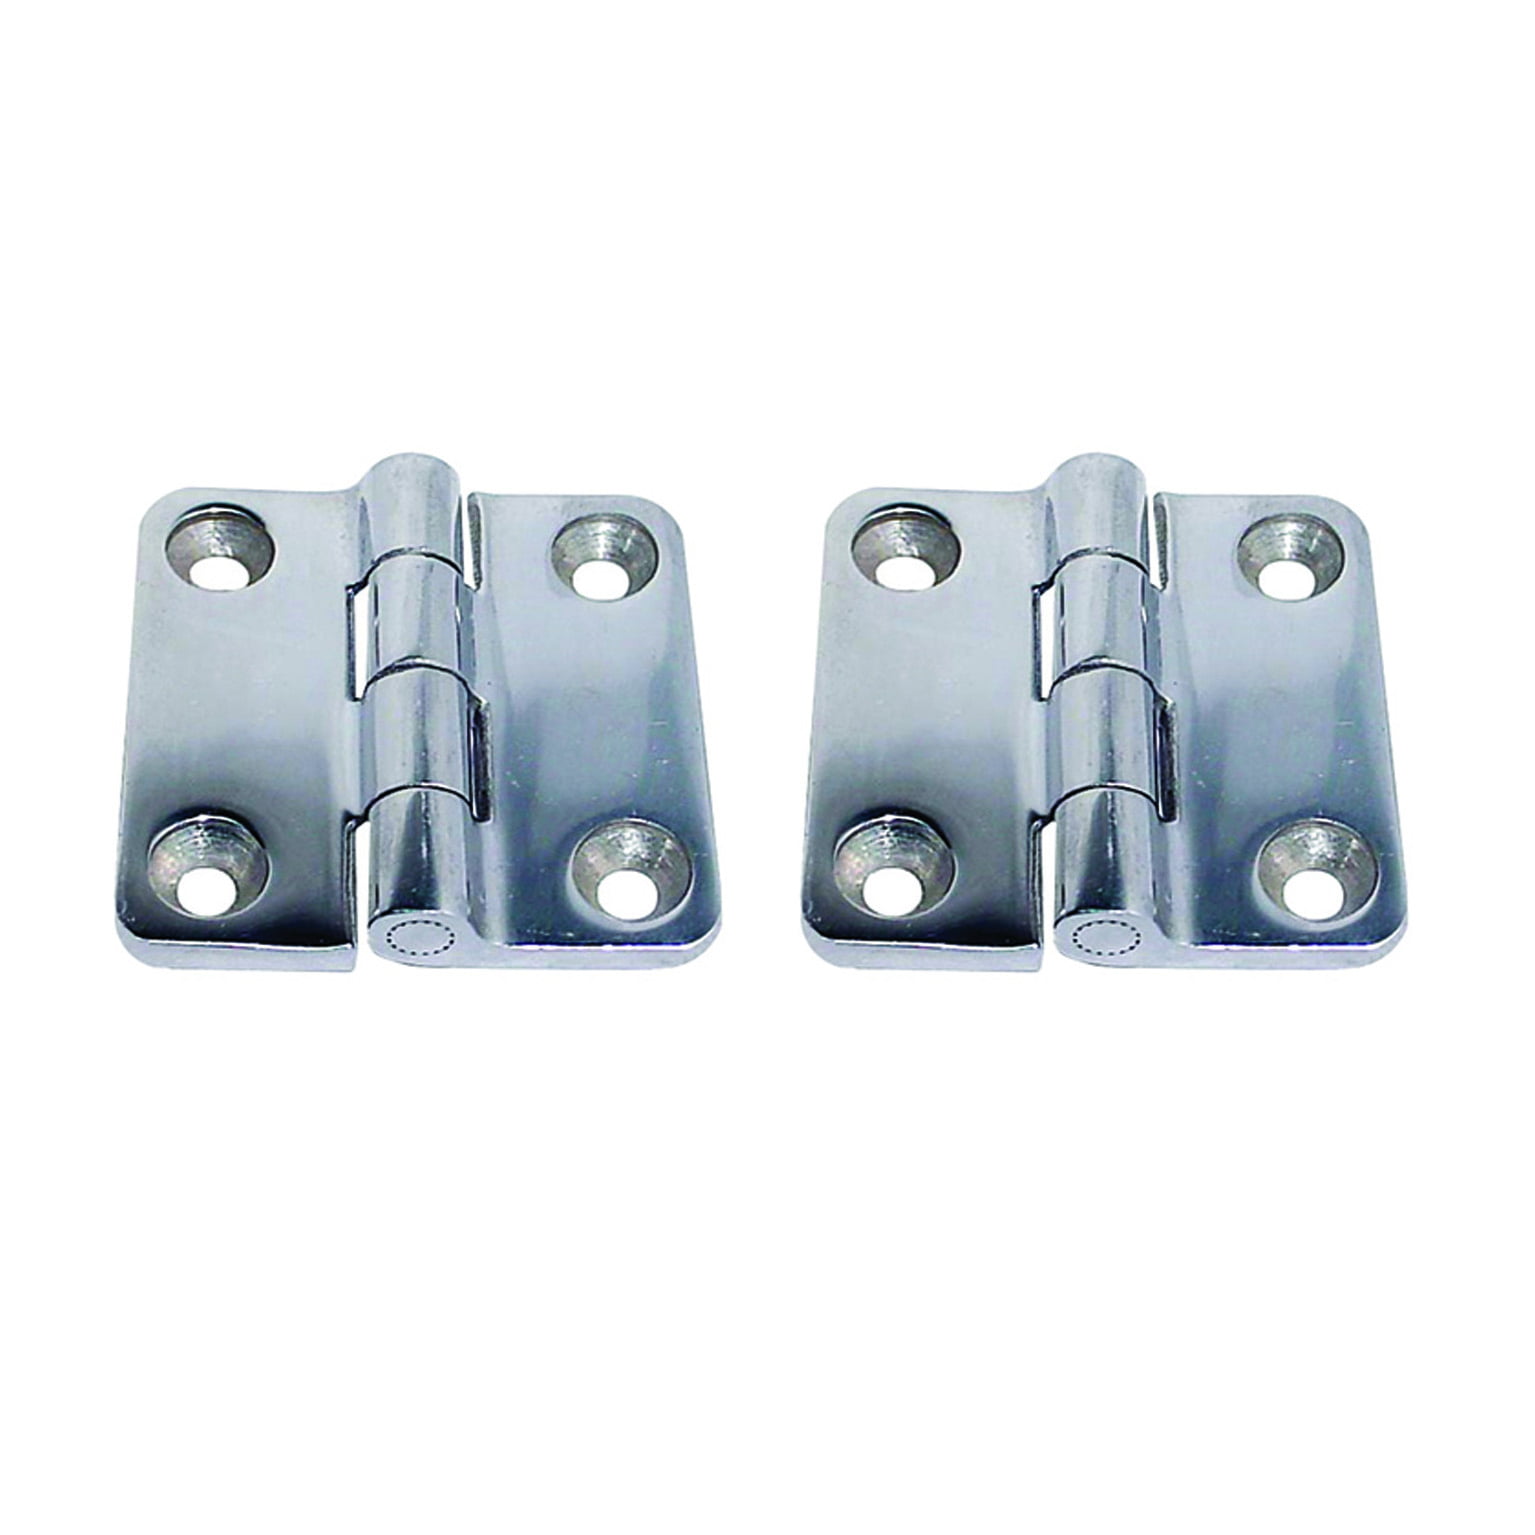 2 piece Stainless Steel Butt Hinge with holes 3.5" long X 1" wide 